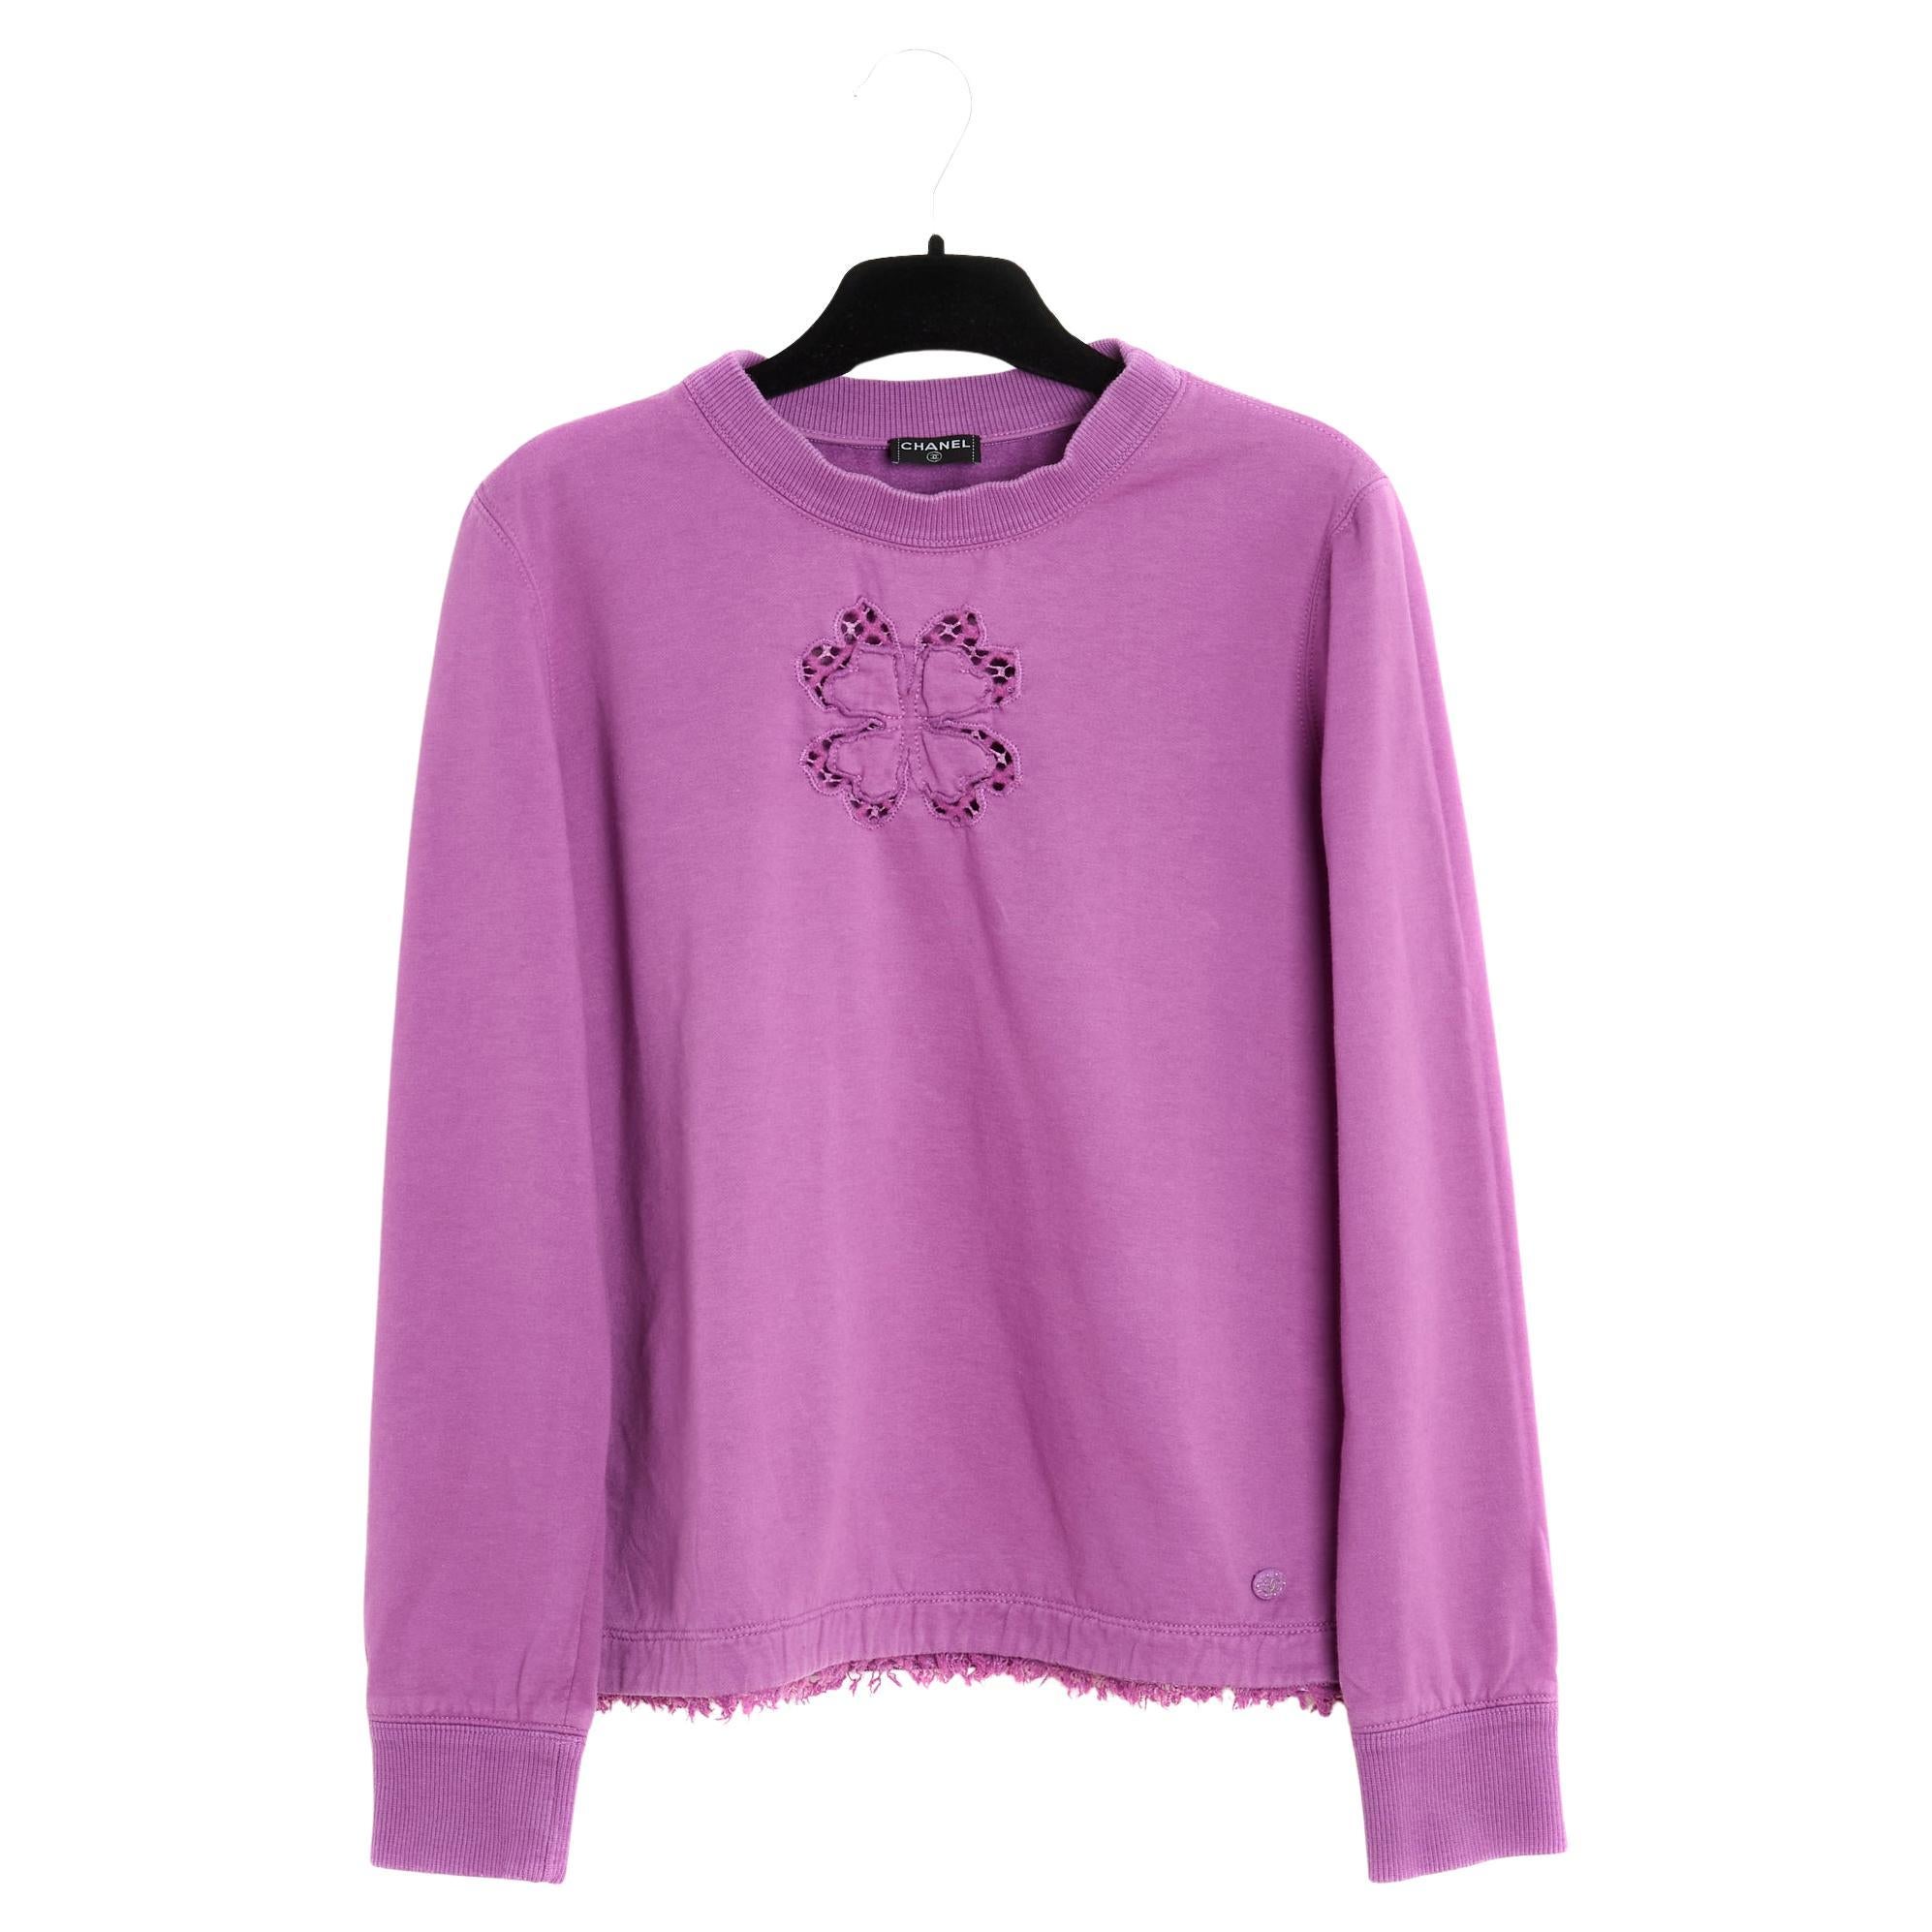 2019 Chanel Top Embroidered Clover Sweatshirt FR34/36 For Sale